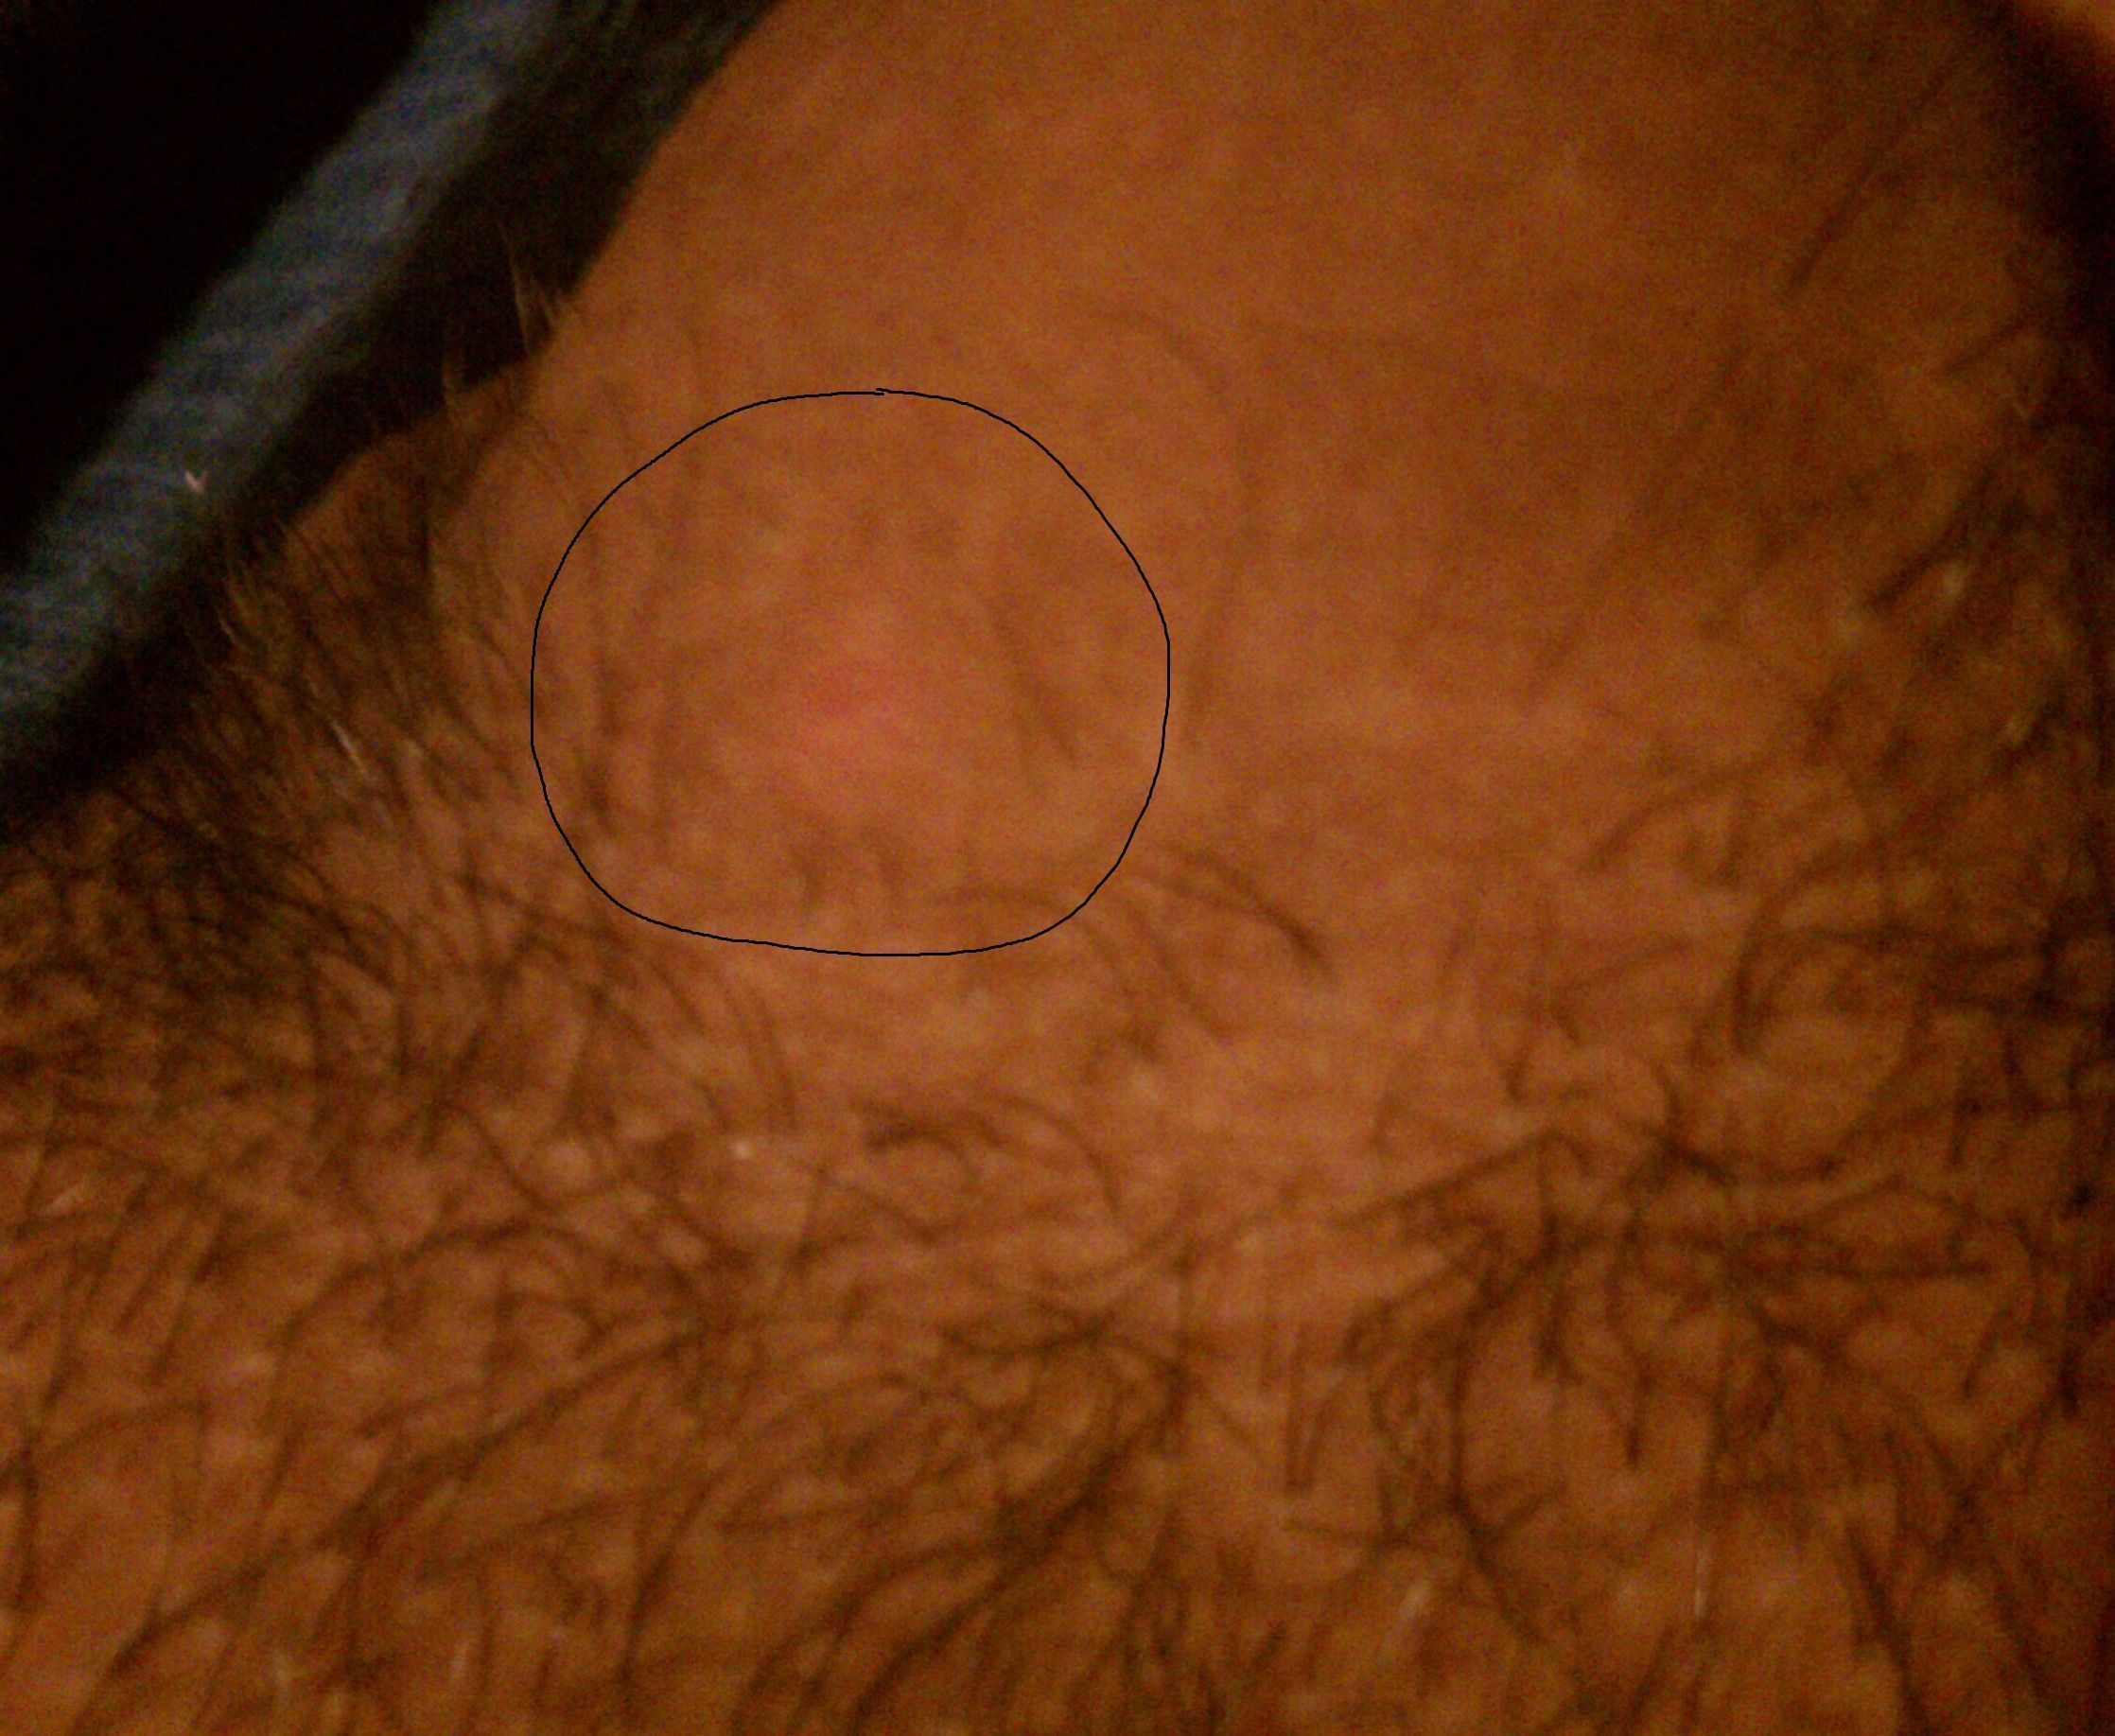 Gem recomended chest Itchy shaved